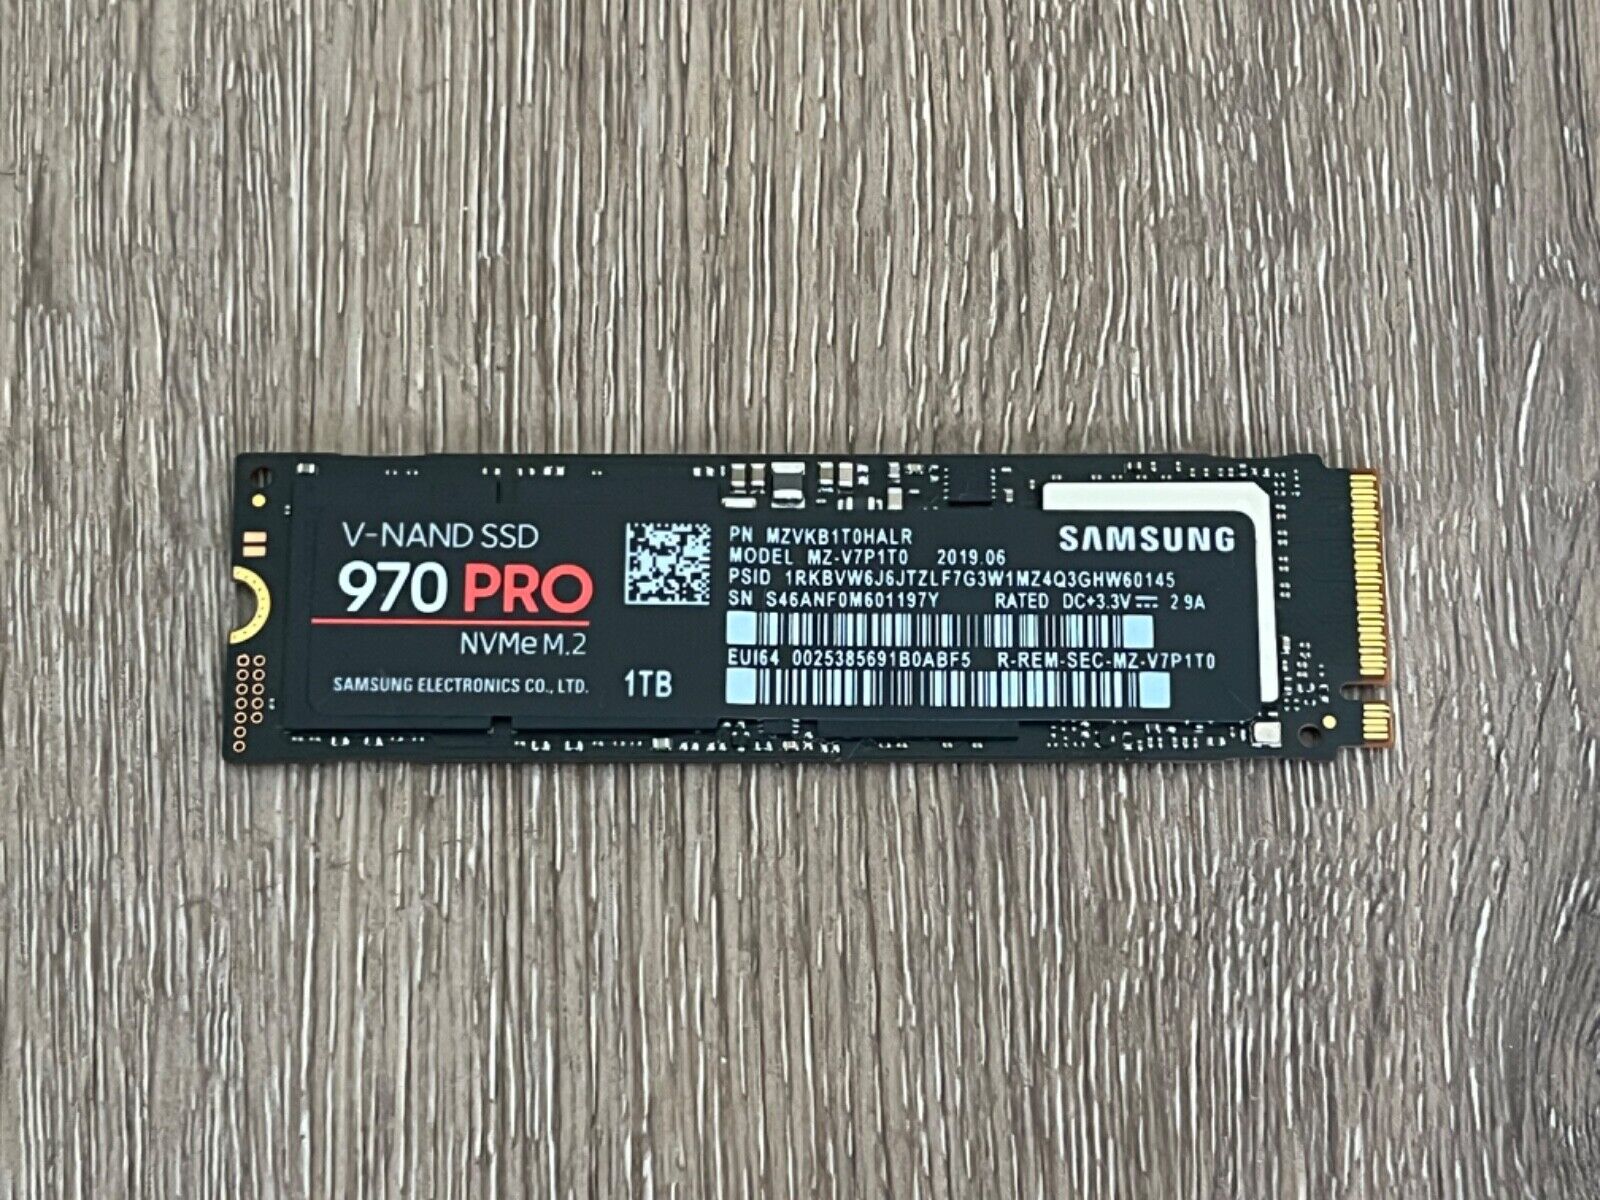 Samsung 970 Pro 1TB NVMe M.2 Solid State Drive SSD (MZ-V7P1T0)